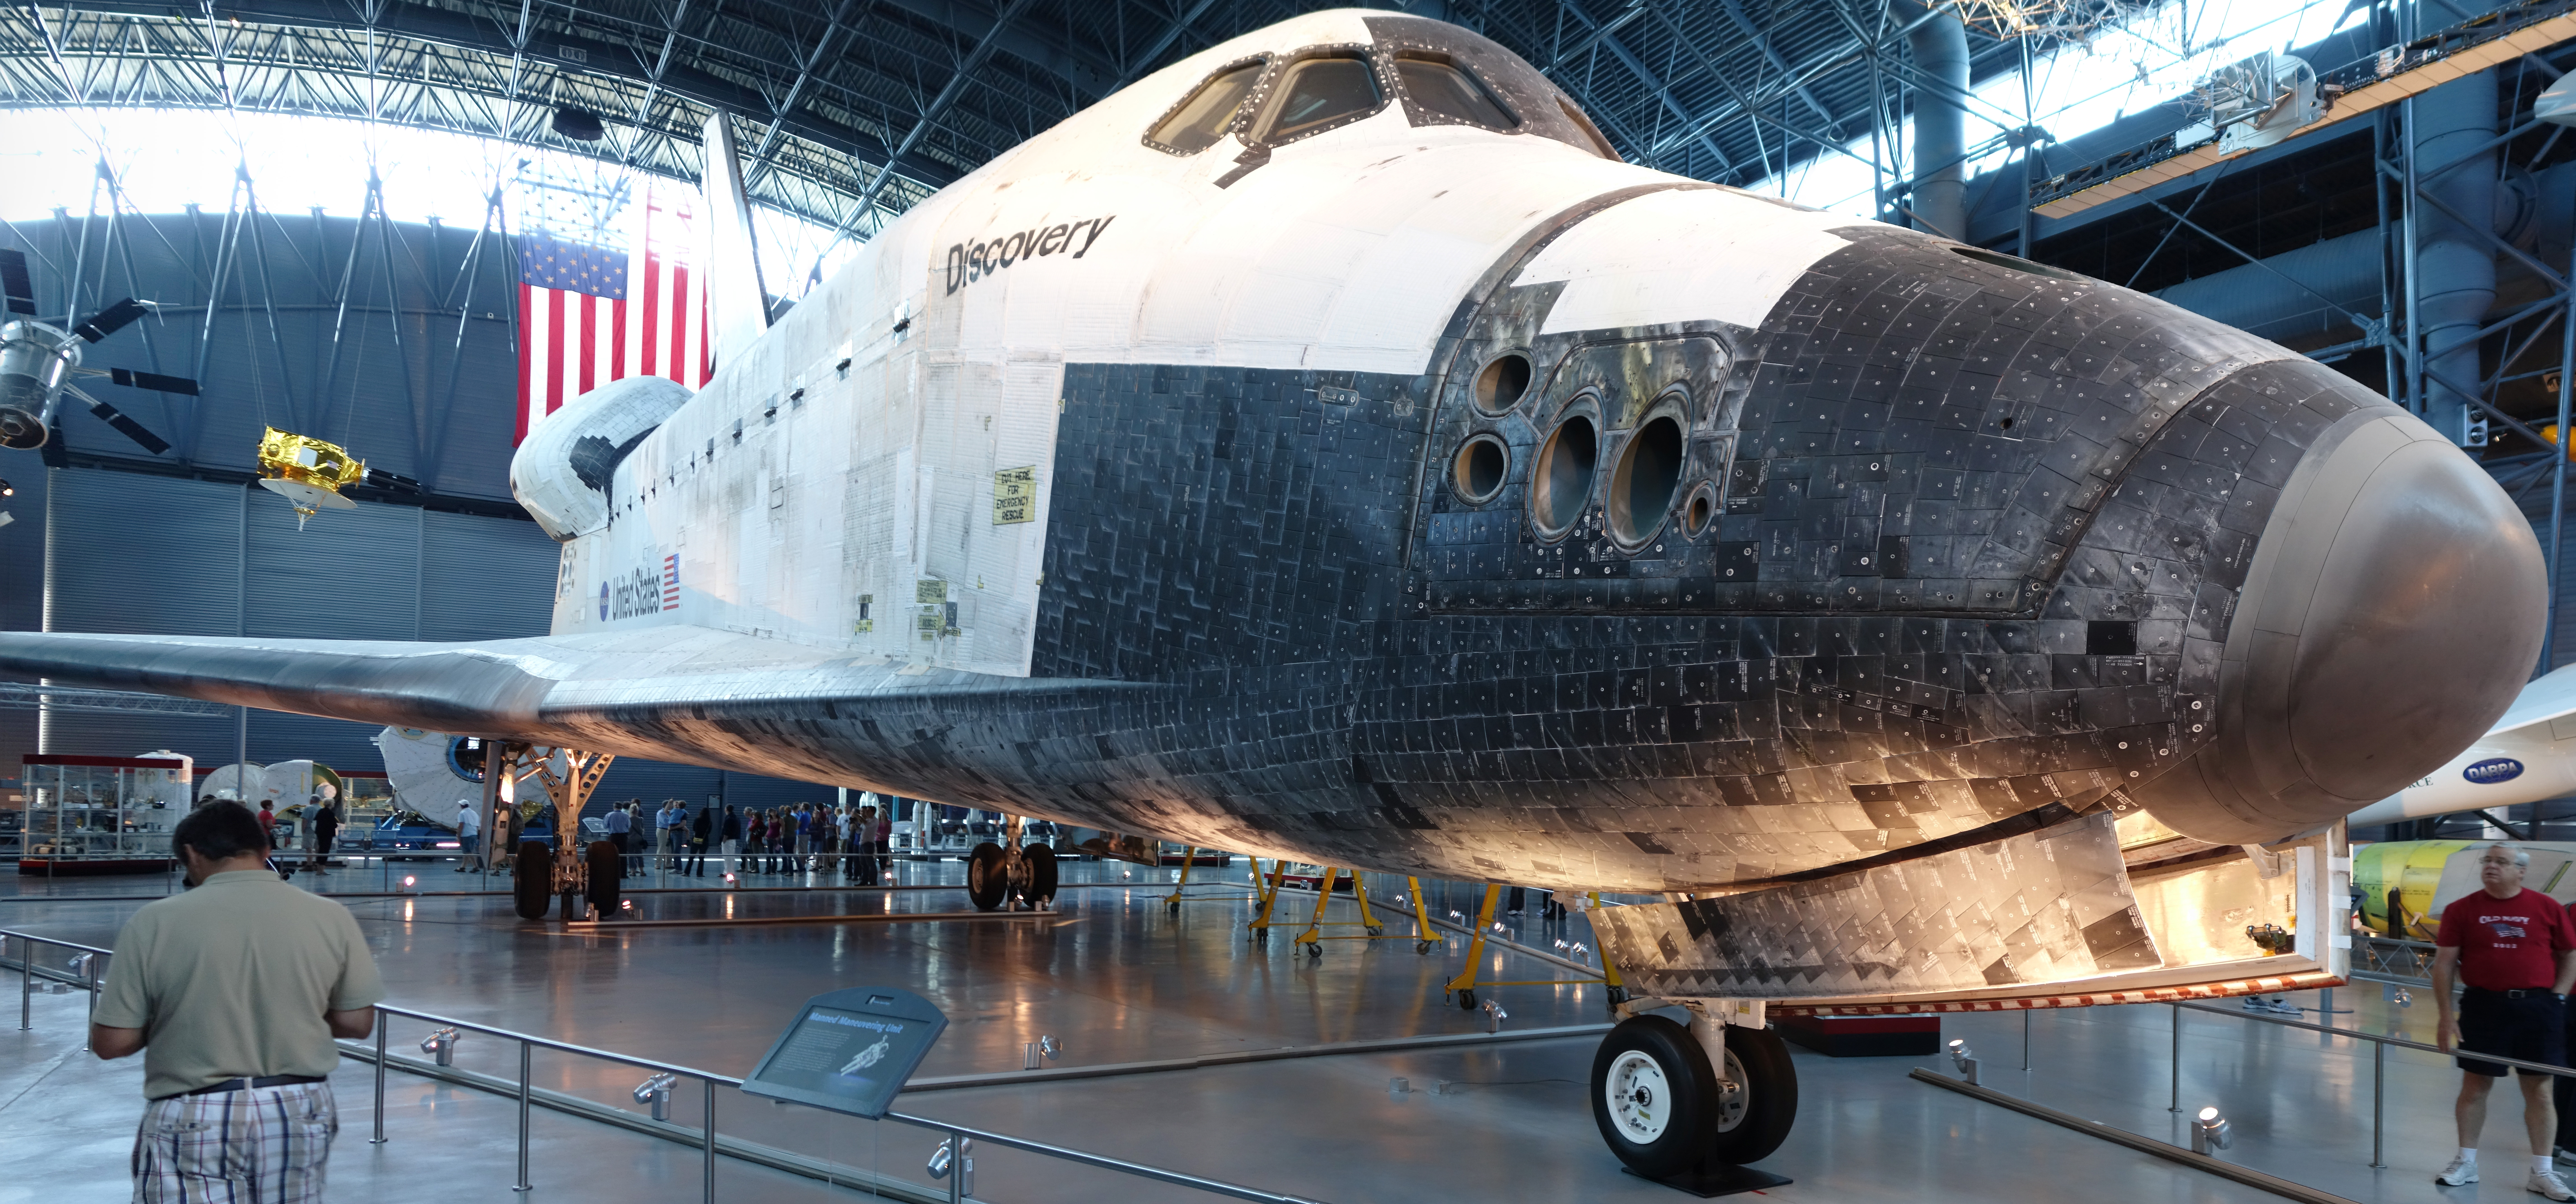 File:Space Shuttle Discovery on Display.jpg - Wikimedia Commons